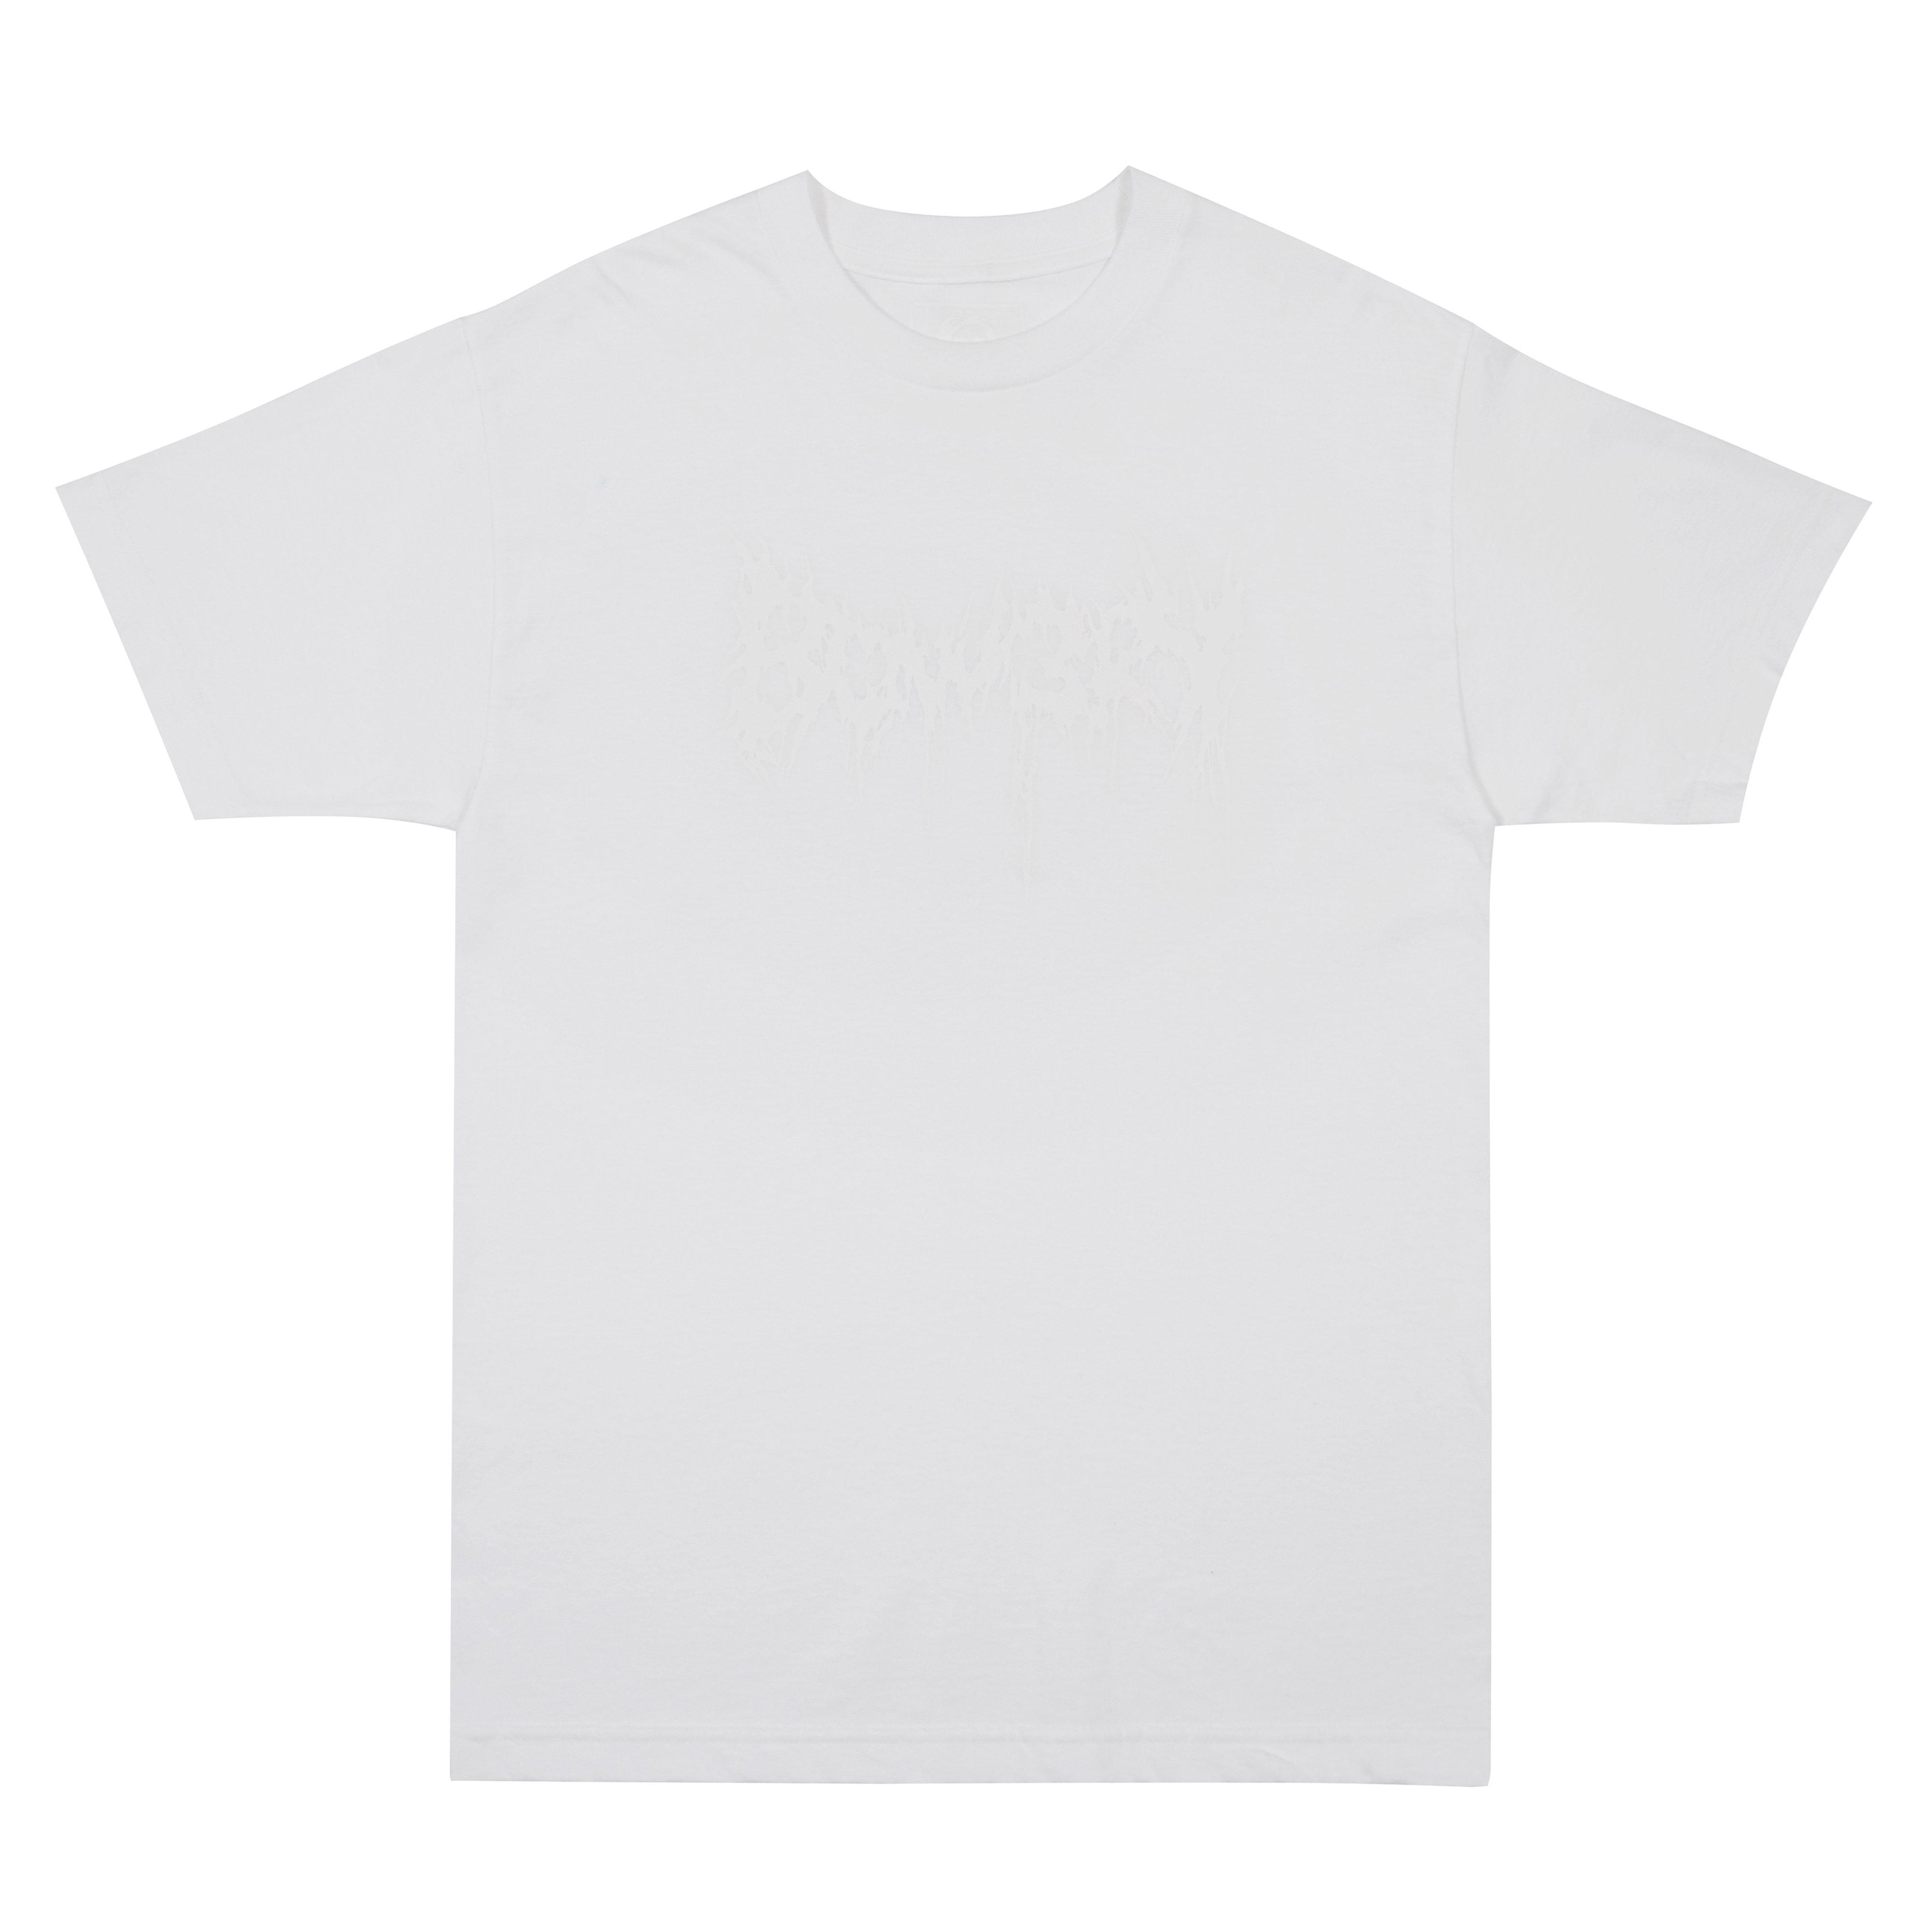 Bow3ry Grind T-Shirt (White) by BOW3RY